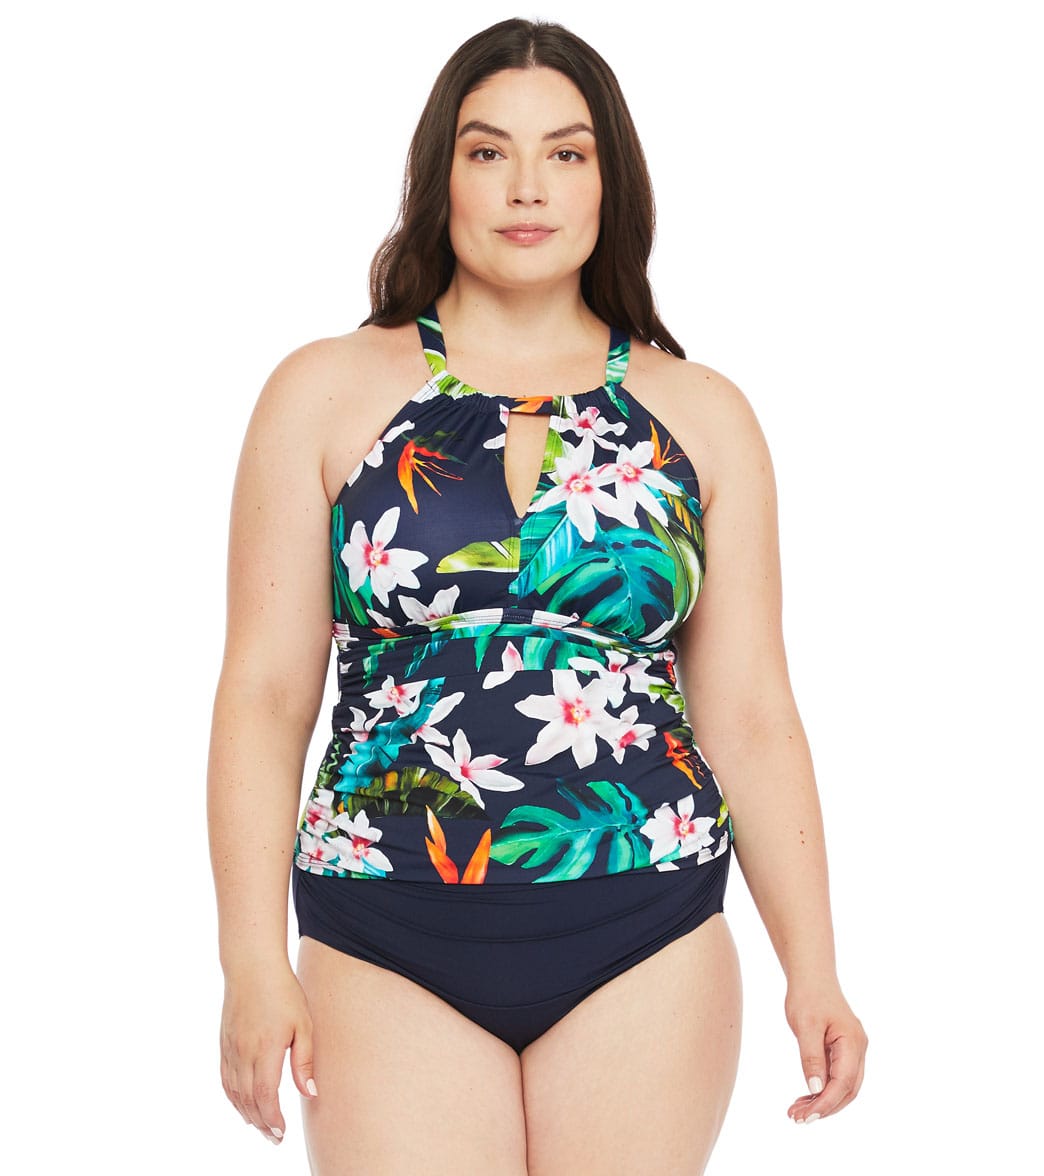 Ralph Lauren Plus Size Watercolor Tropical High Neck Tankini Top At Swimoutlet Com Free Shipping Upgrade your holiday wardrobe with signature styles from ralph lauren's range of men's designer shorts and swimwear. ralph lauren plus size watercolor tropical high neck tankini top